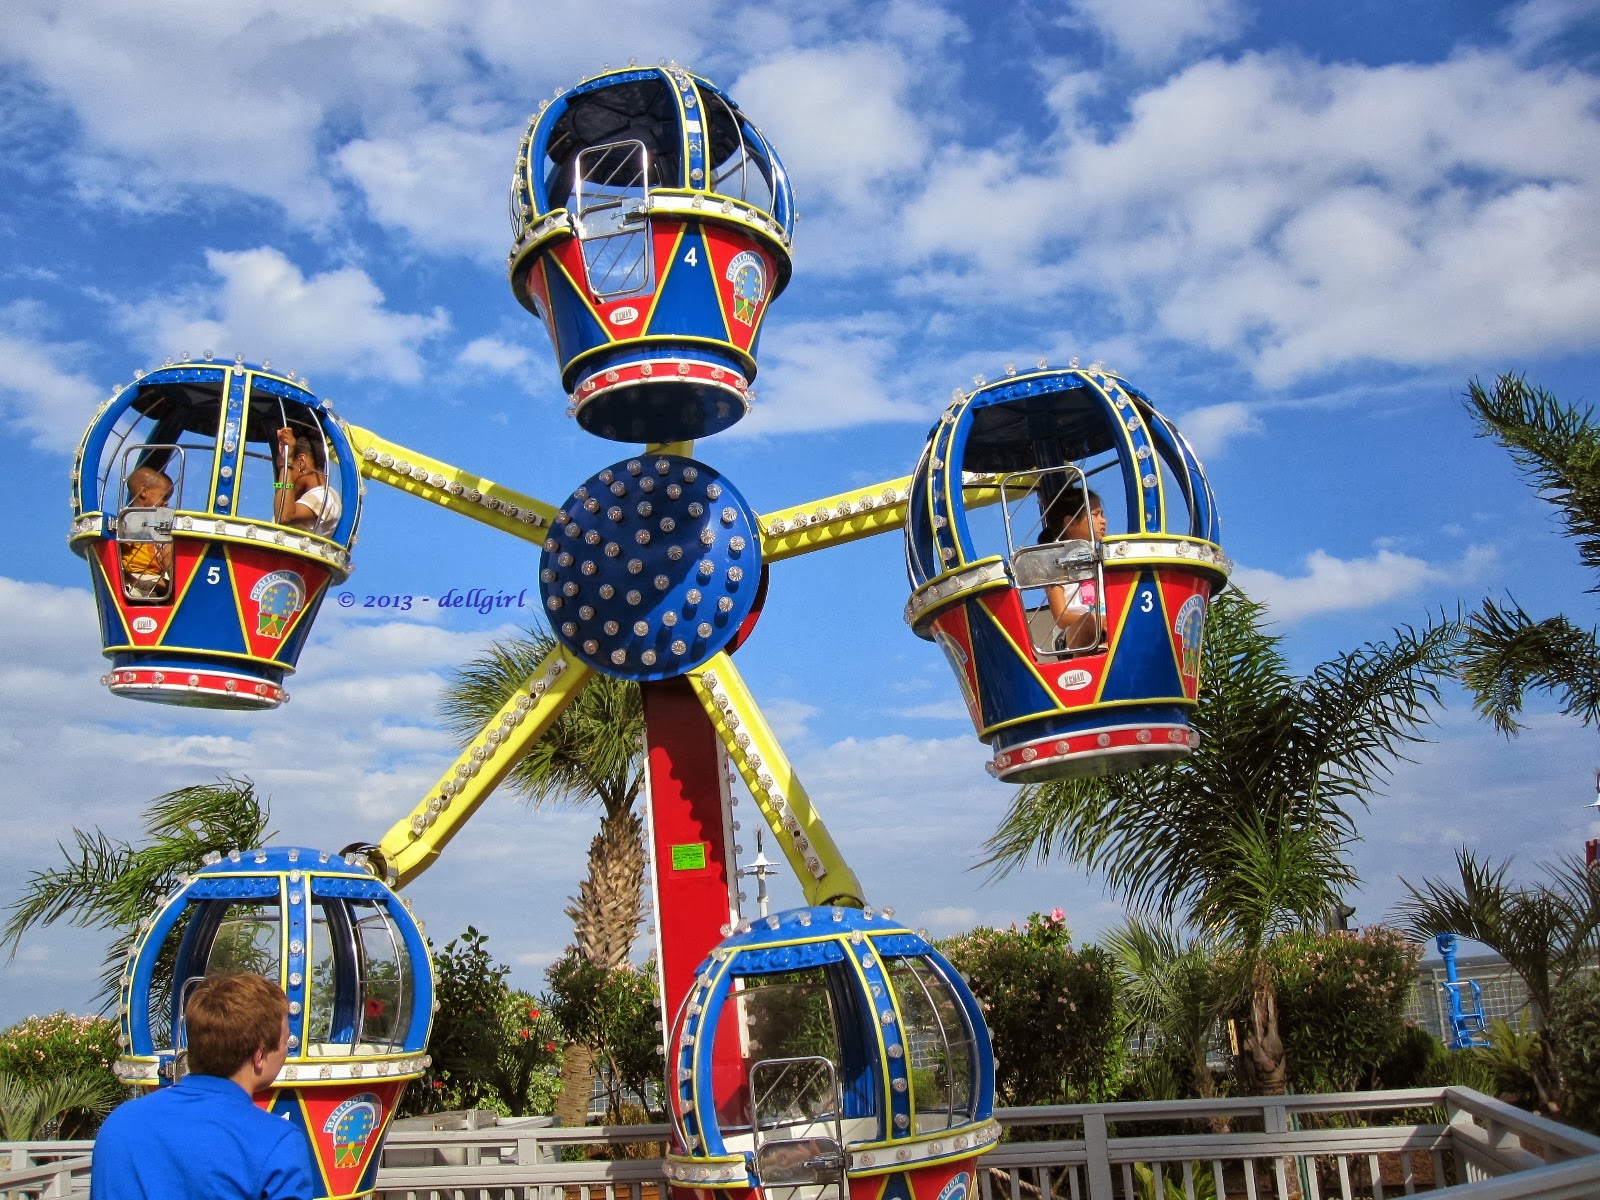 Kemah Boardwalk: Rides & Attractions for Kids